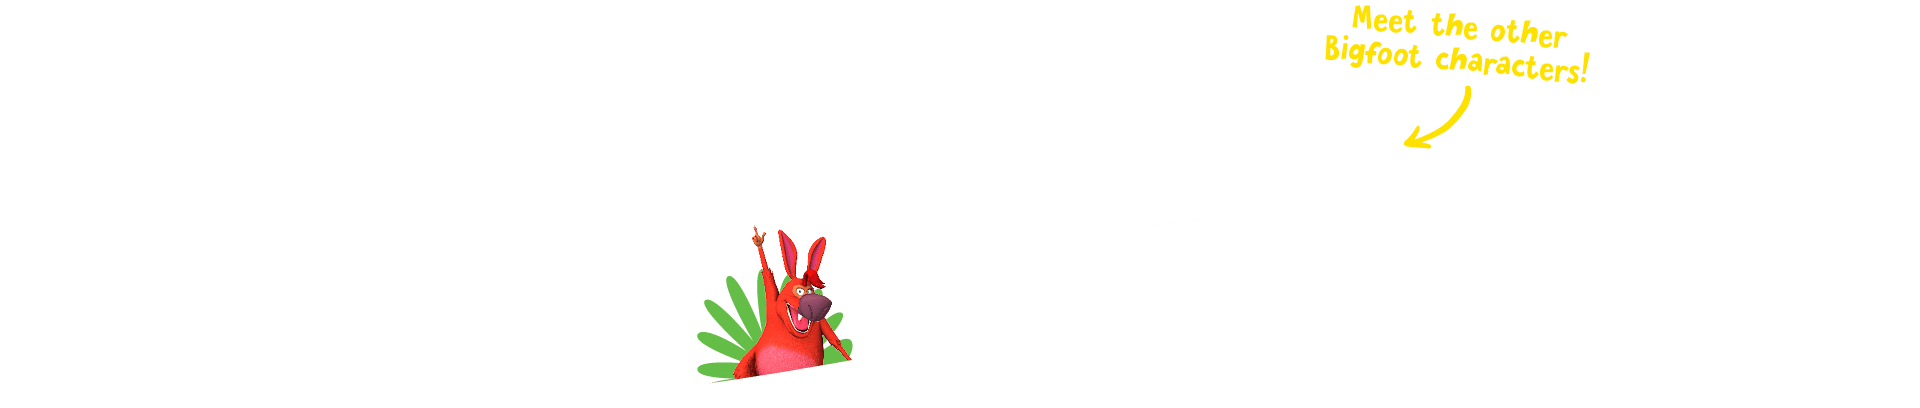 Rumble Silhouette Curve Updated